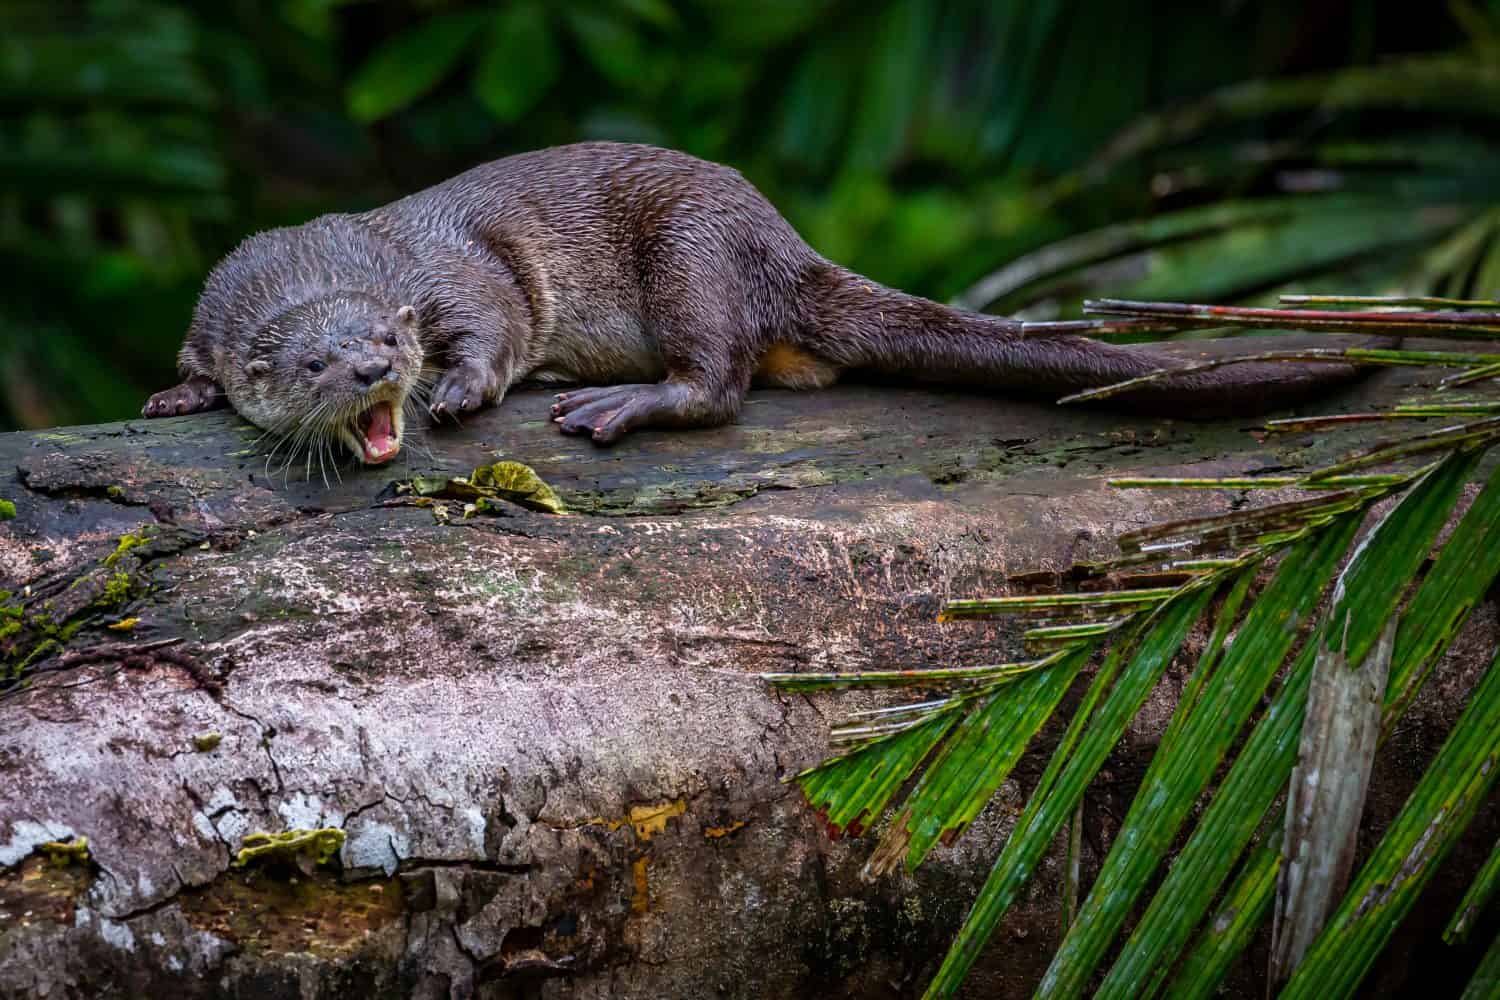 Neotropical River Otter in Costa Rica